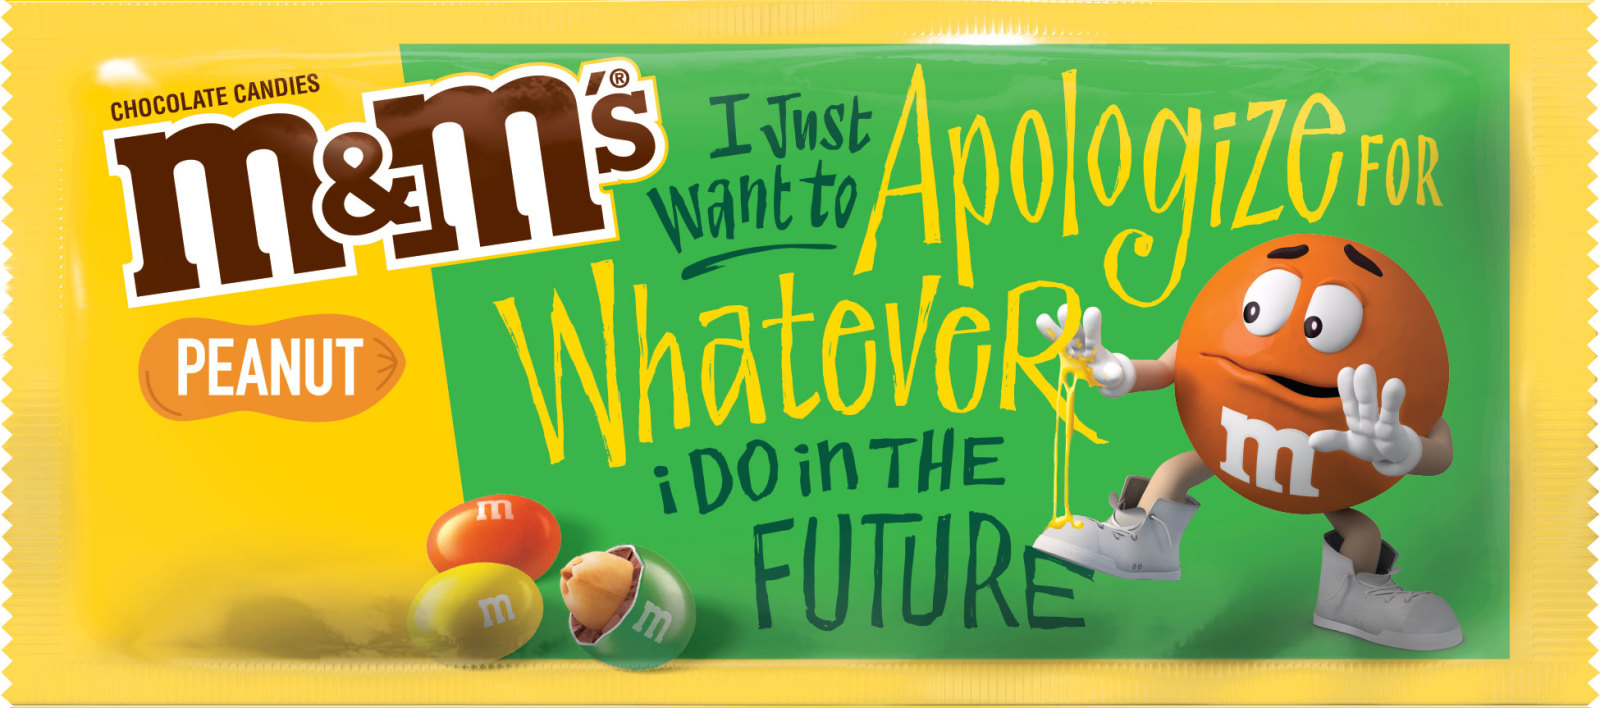 We Need Less Offensive M&M's